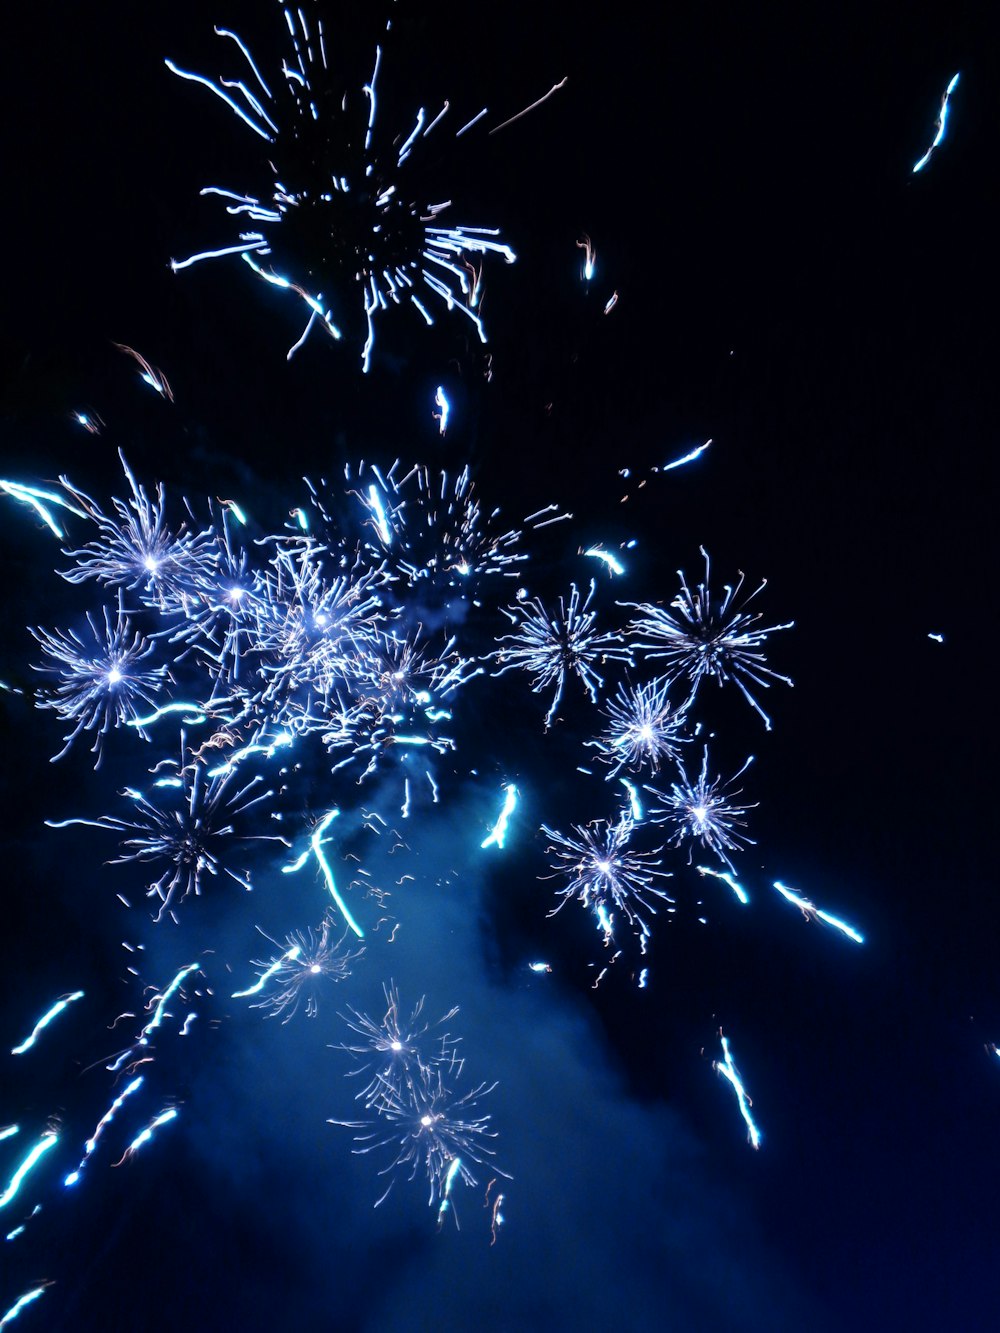 white and purple fireworks display during nighttime